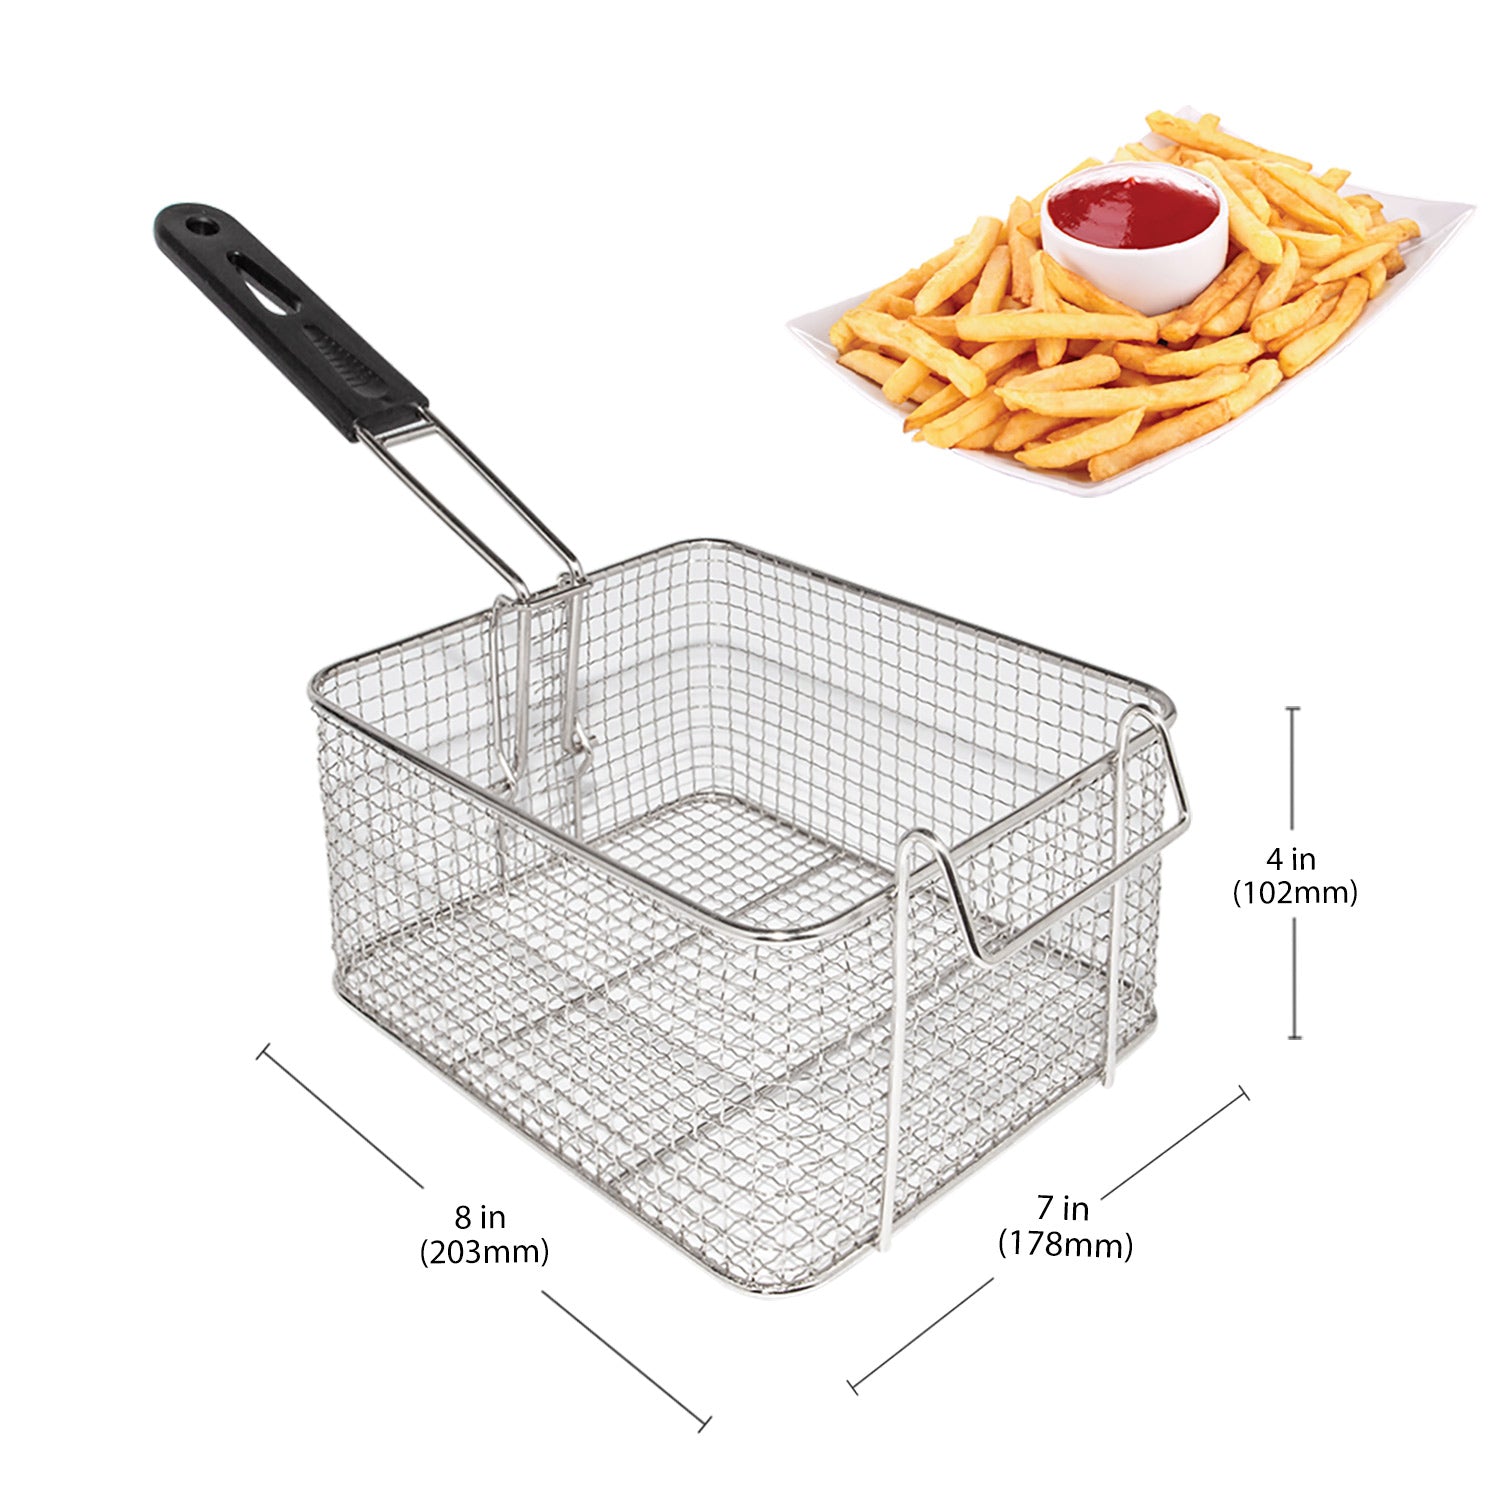 Duronic AF1 /B Replacement Fry Basket and Handle Set, 2 Litre Capacity